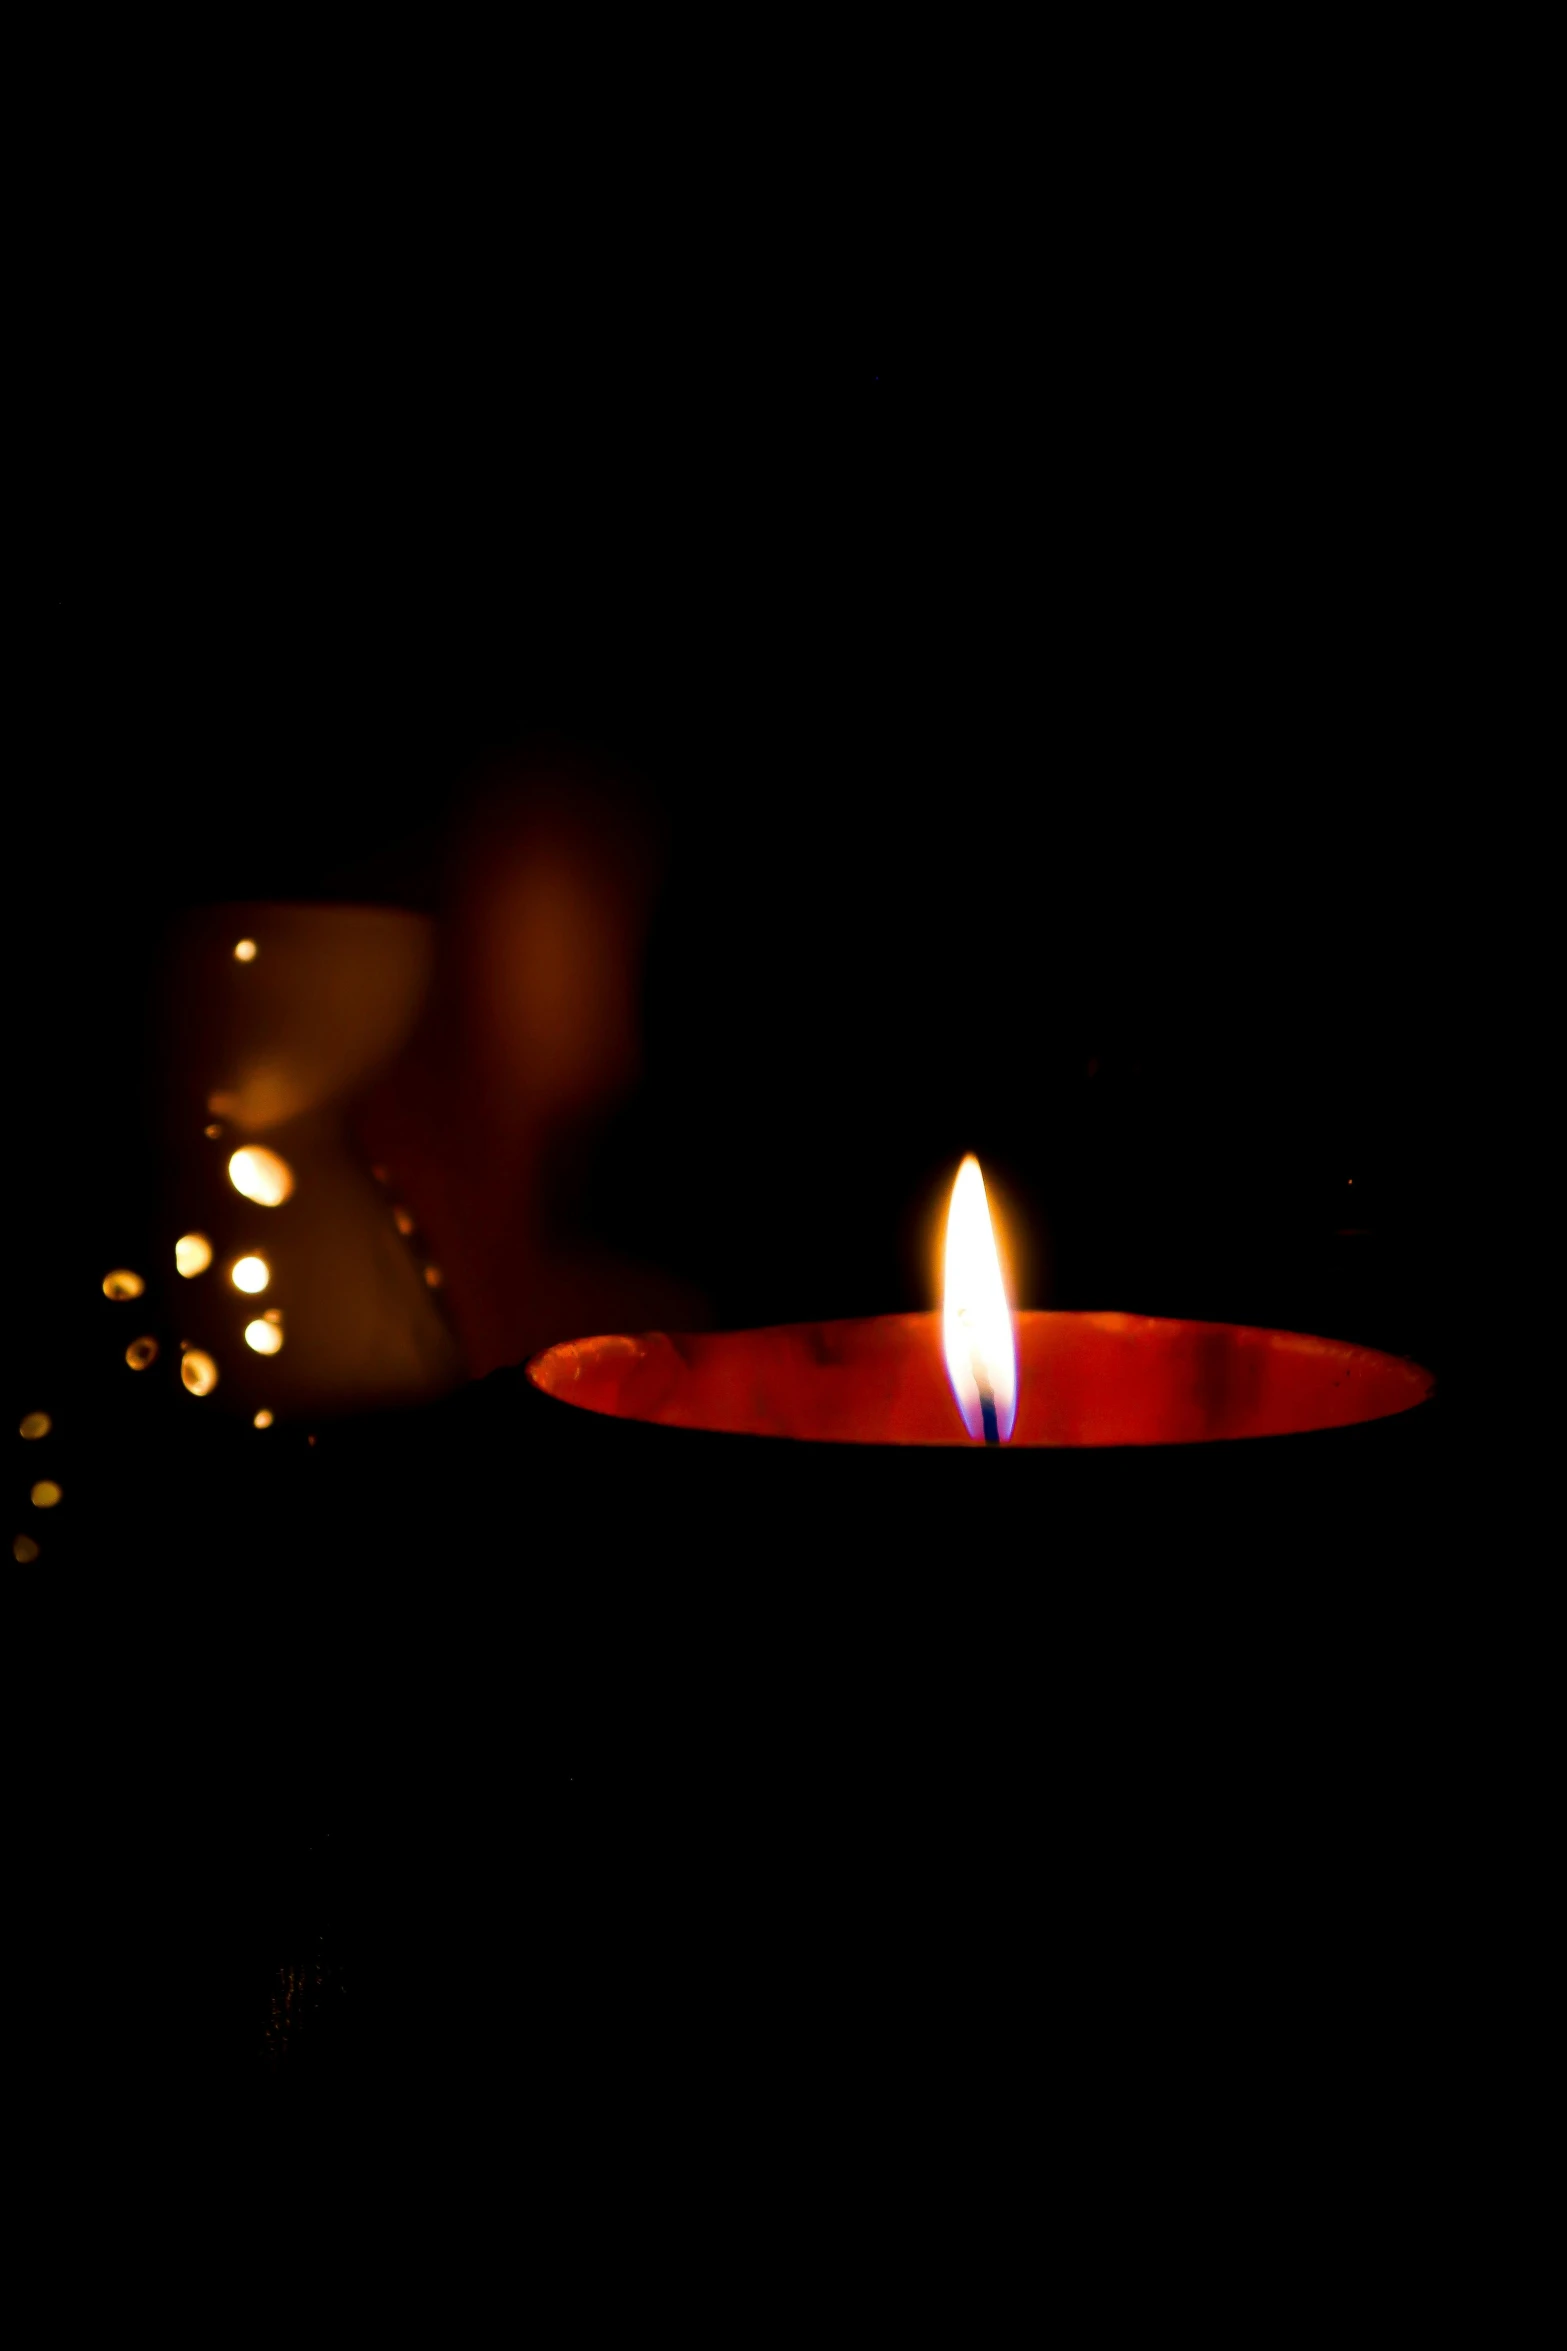 a candle is lit on a dark background